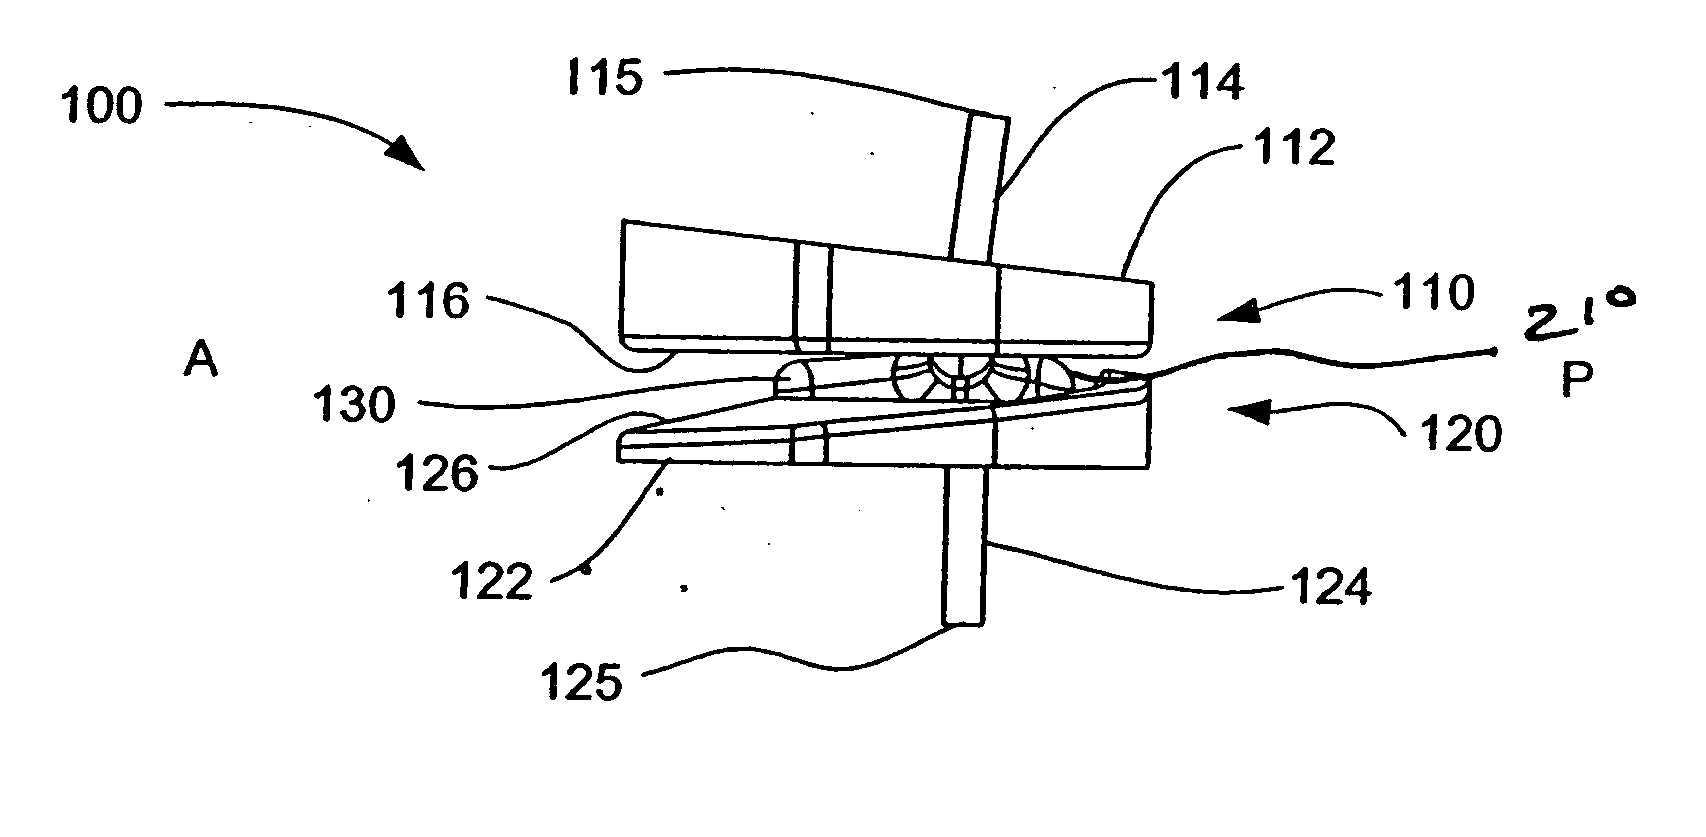 Laterally insertable artificial vertebral disk replacement implant with crossbar spacer